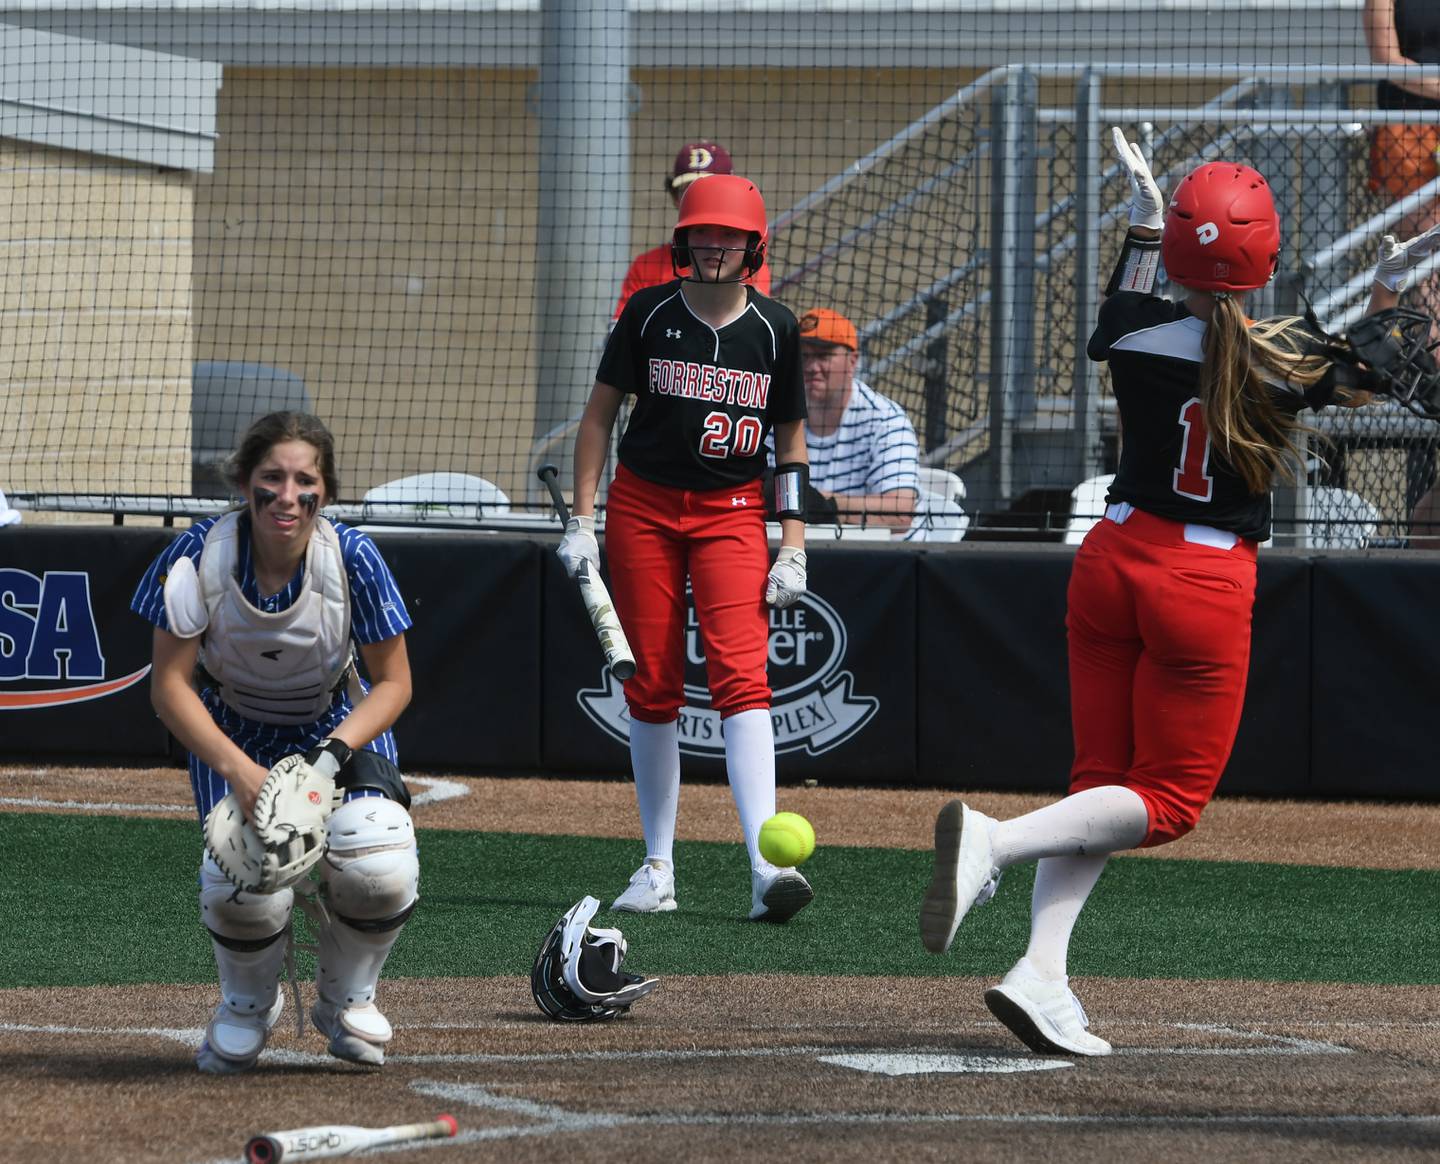 Forreston's Rylee Broshous (1) celebrates after scoring a run against Newark as Jenna Greenfield (20) watches during action in the third place game of the 1A state softball tournament in Peoria on June 4. The Cardinals won the game 4-2.